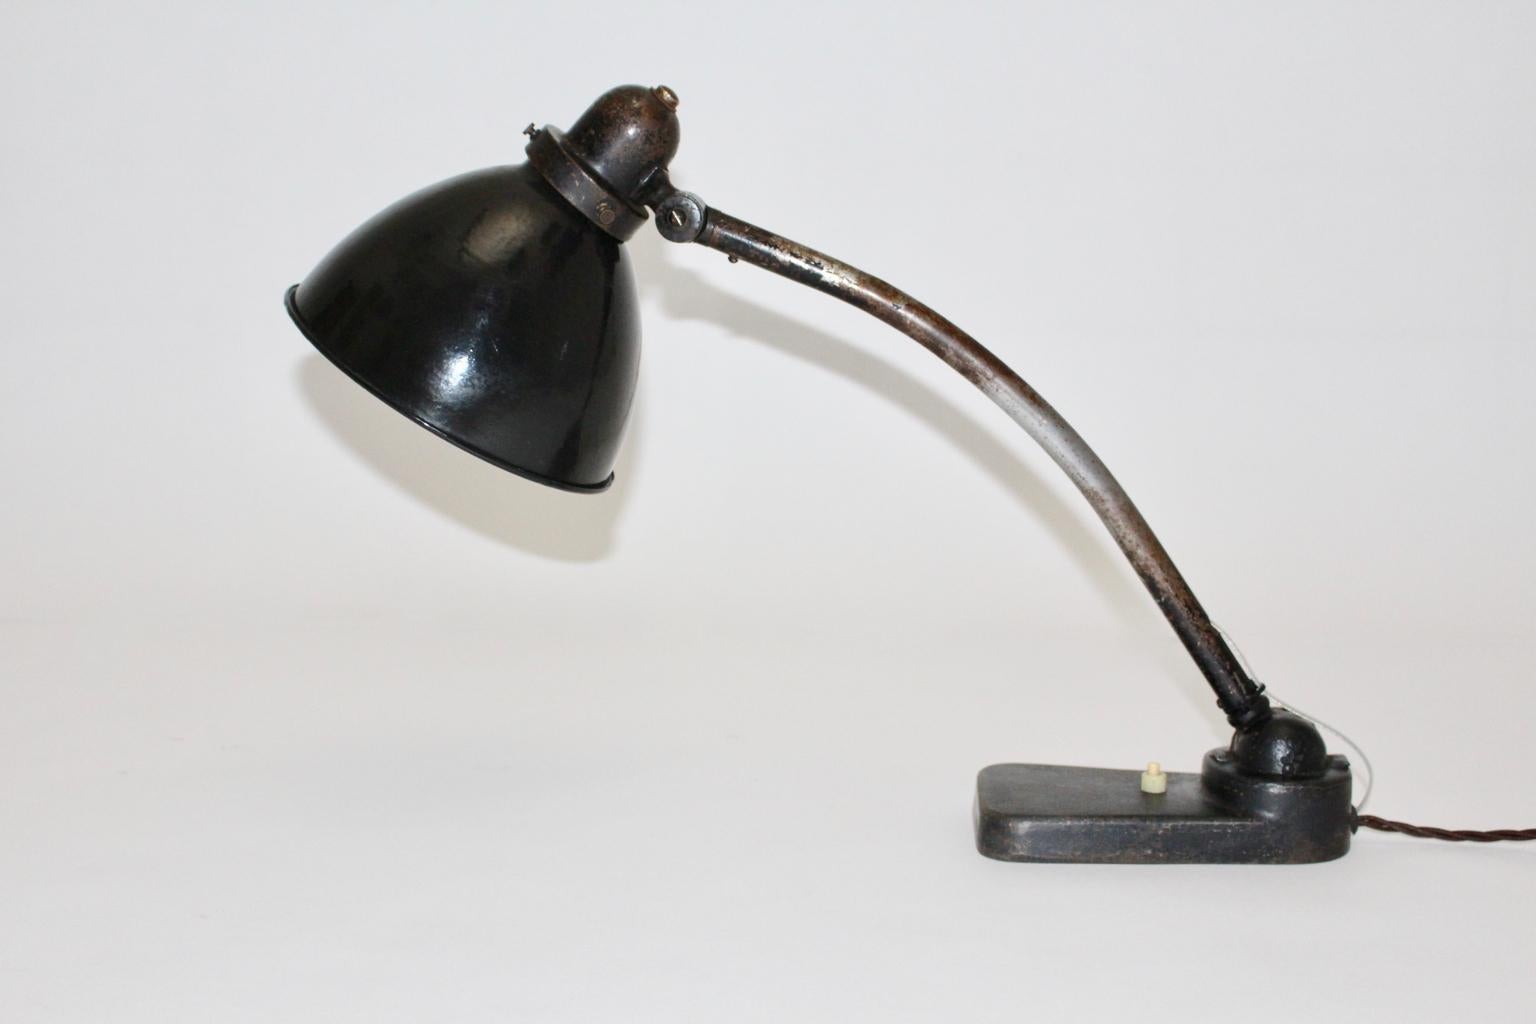 Bauhaus table lamp or architects lamp from the 1930s Germany.
A beautiful table lamp from black lacquered metal, which shows an adjustable shade from up to down.
While the shade is inside white and black enameled the table lamp features black